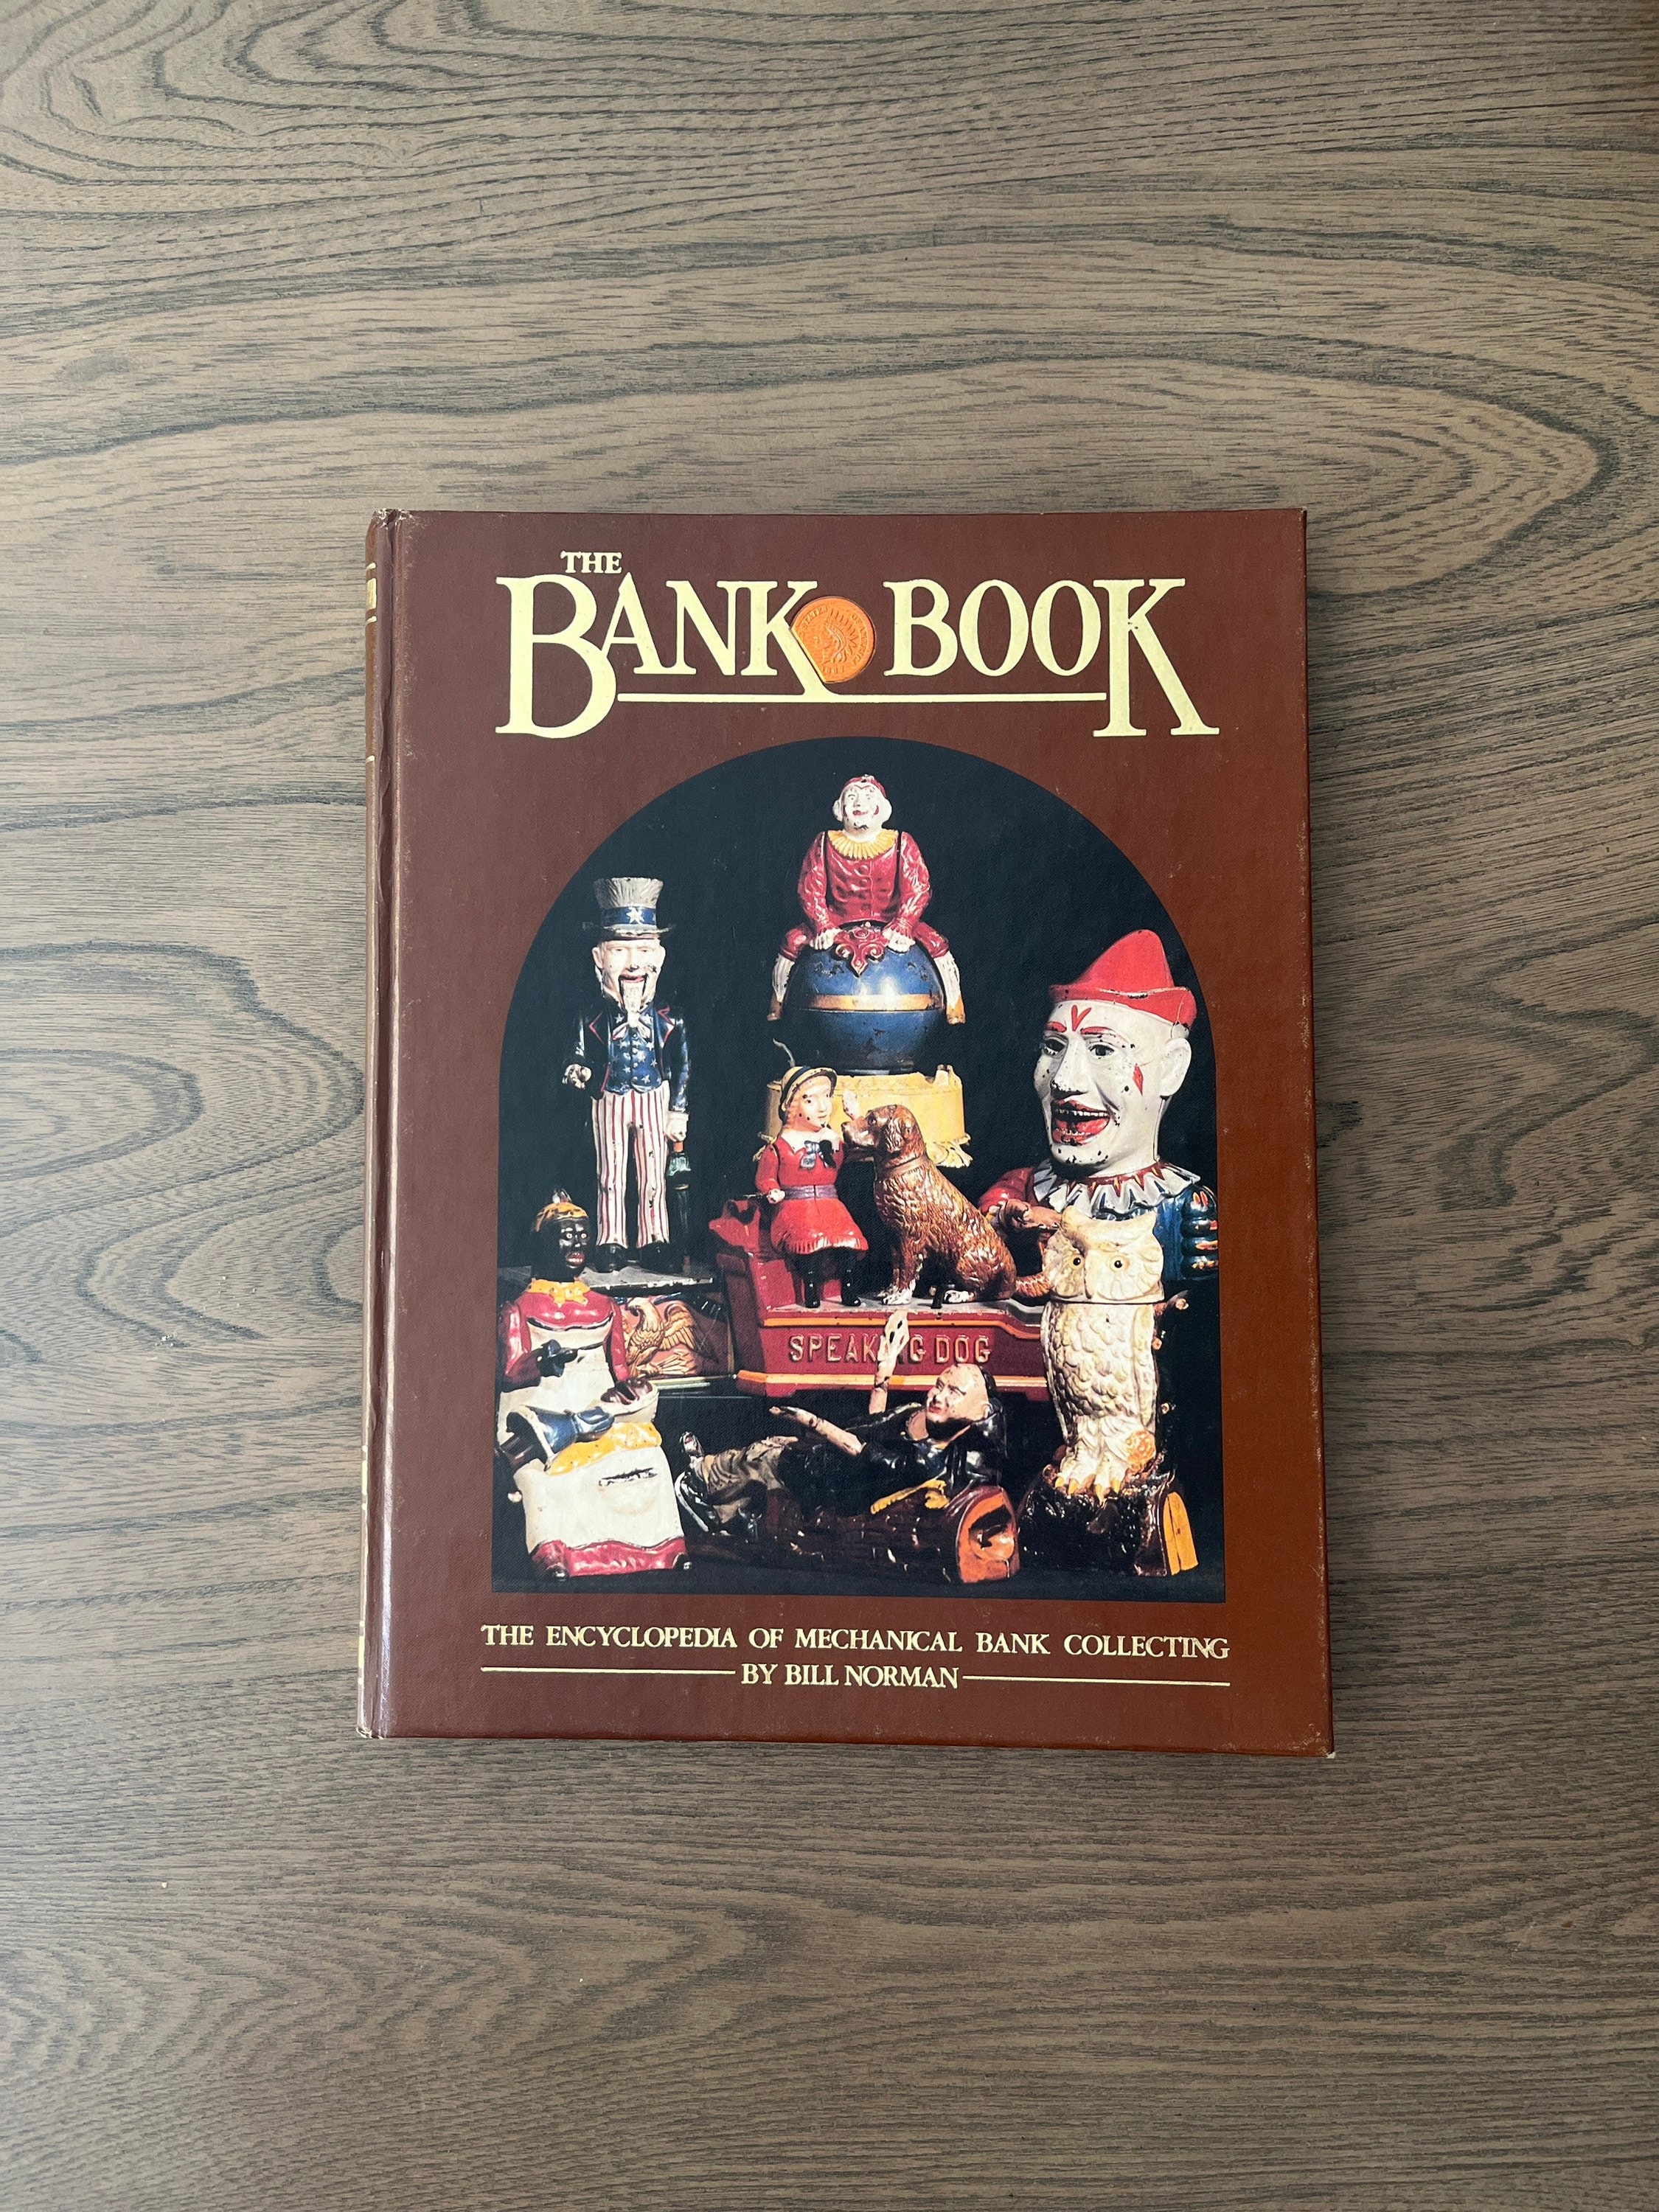 The Bank Book by Bill Norman, Encyclopedia of Mechanical Bank